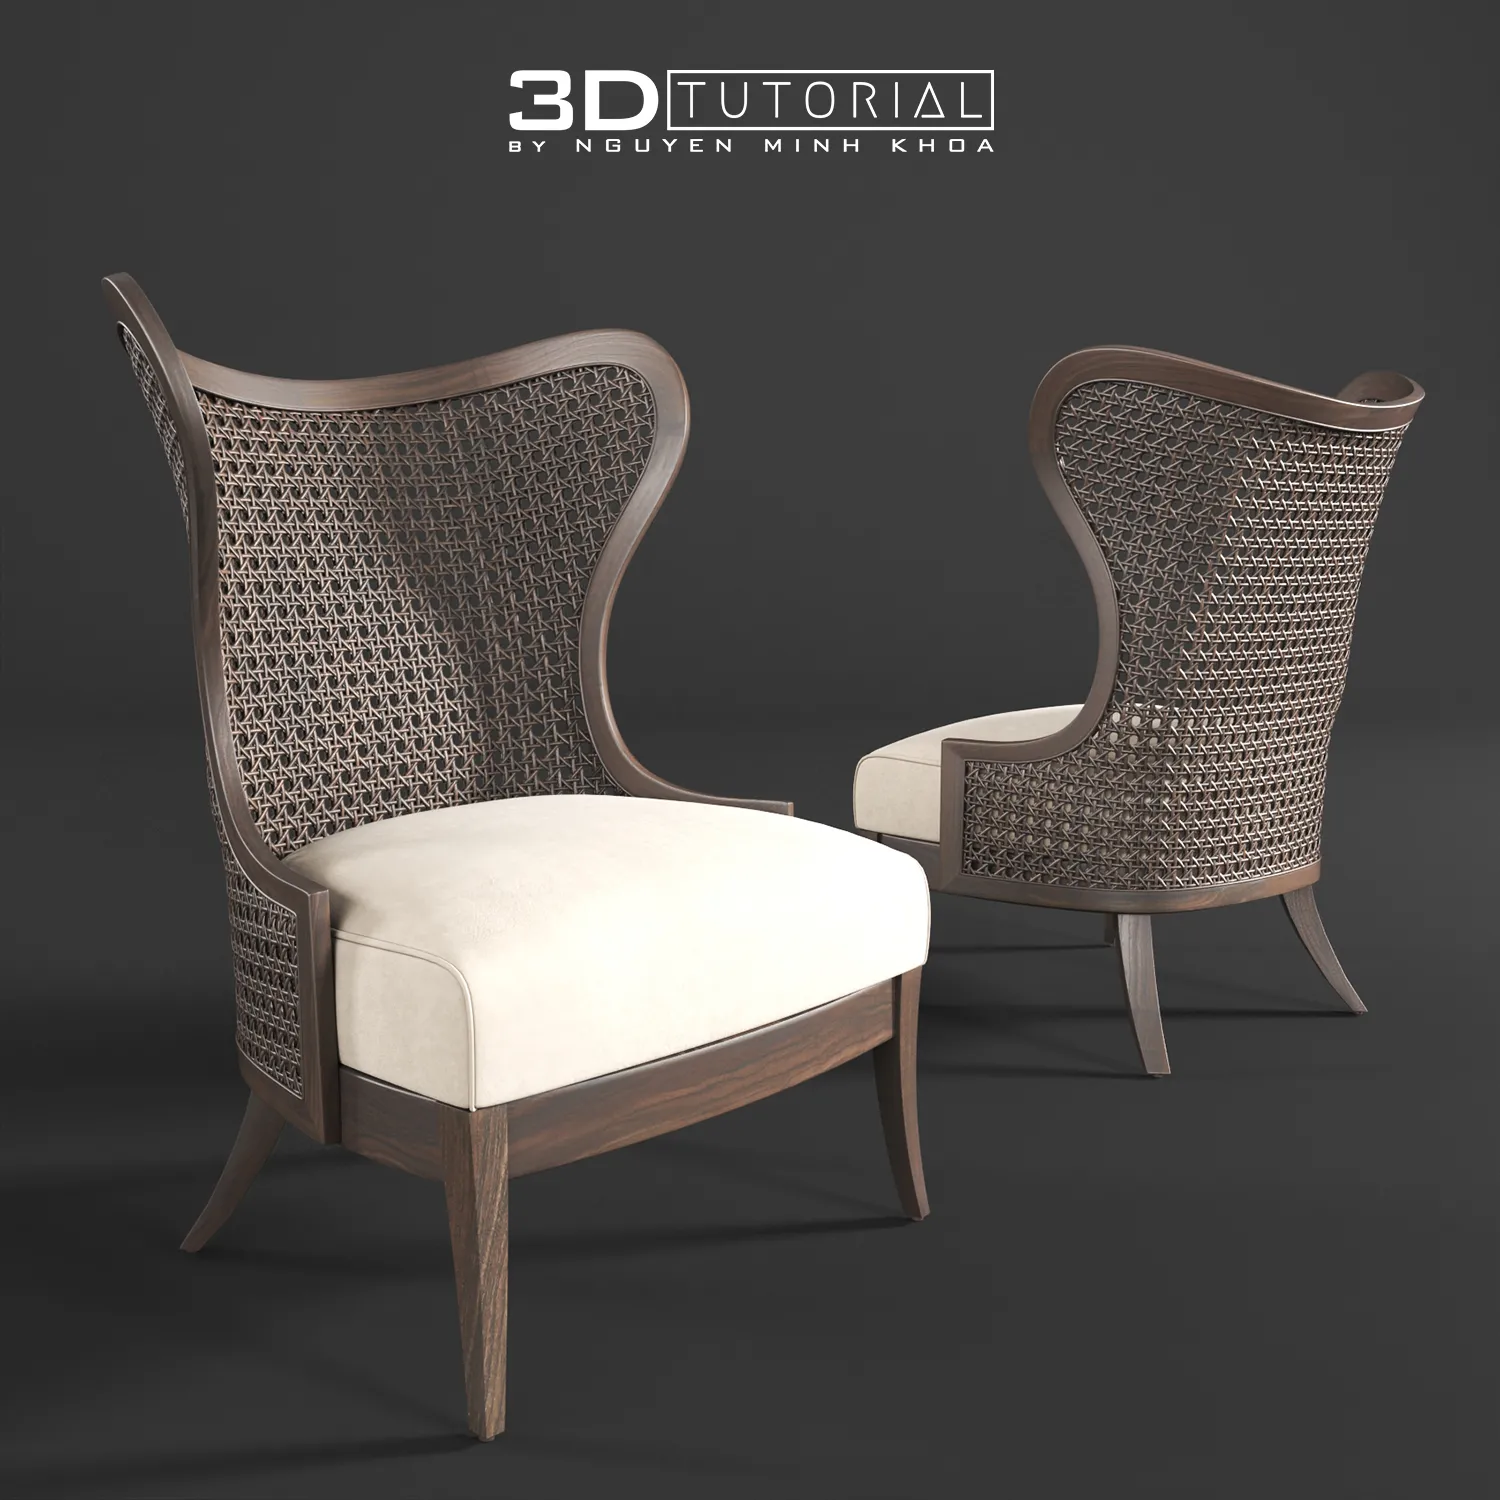 FURNITURE 3D MODELS – Levine wing chair modelby NguyenMinhKhoa